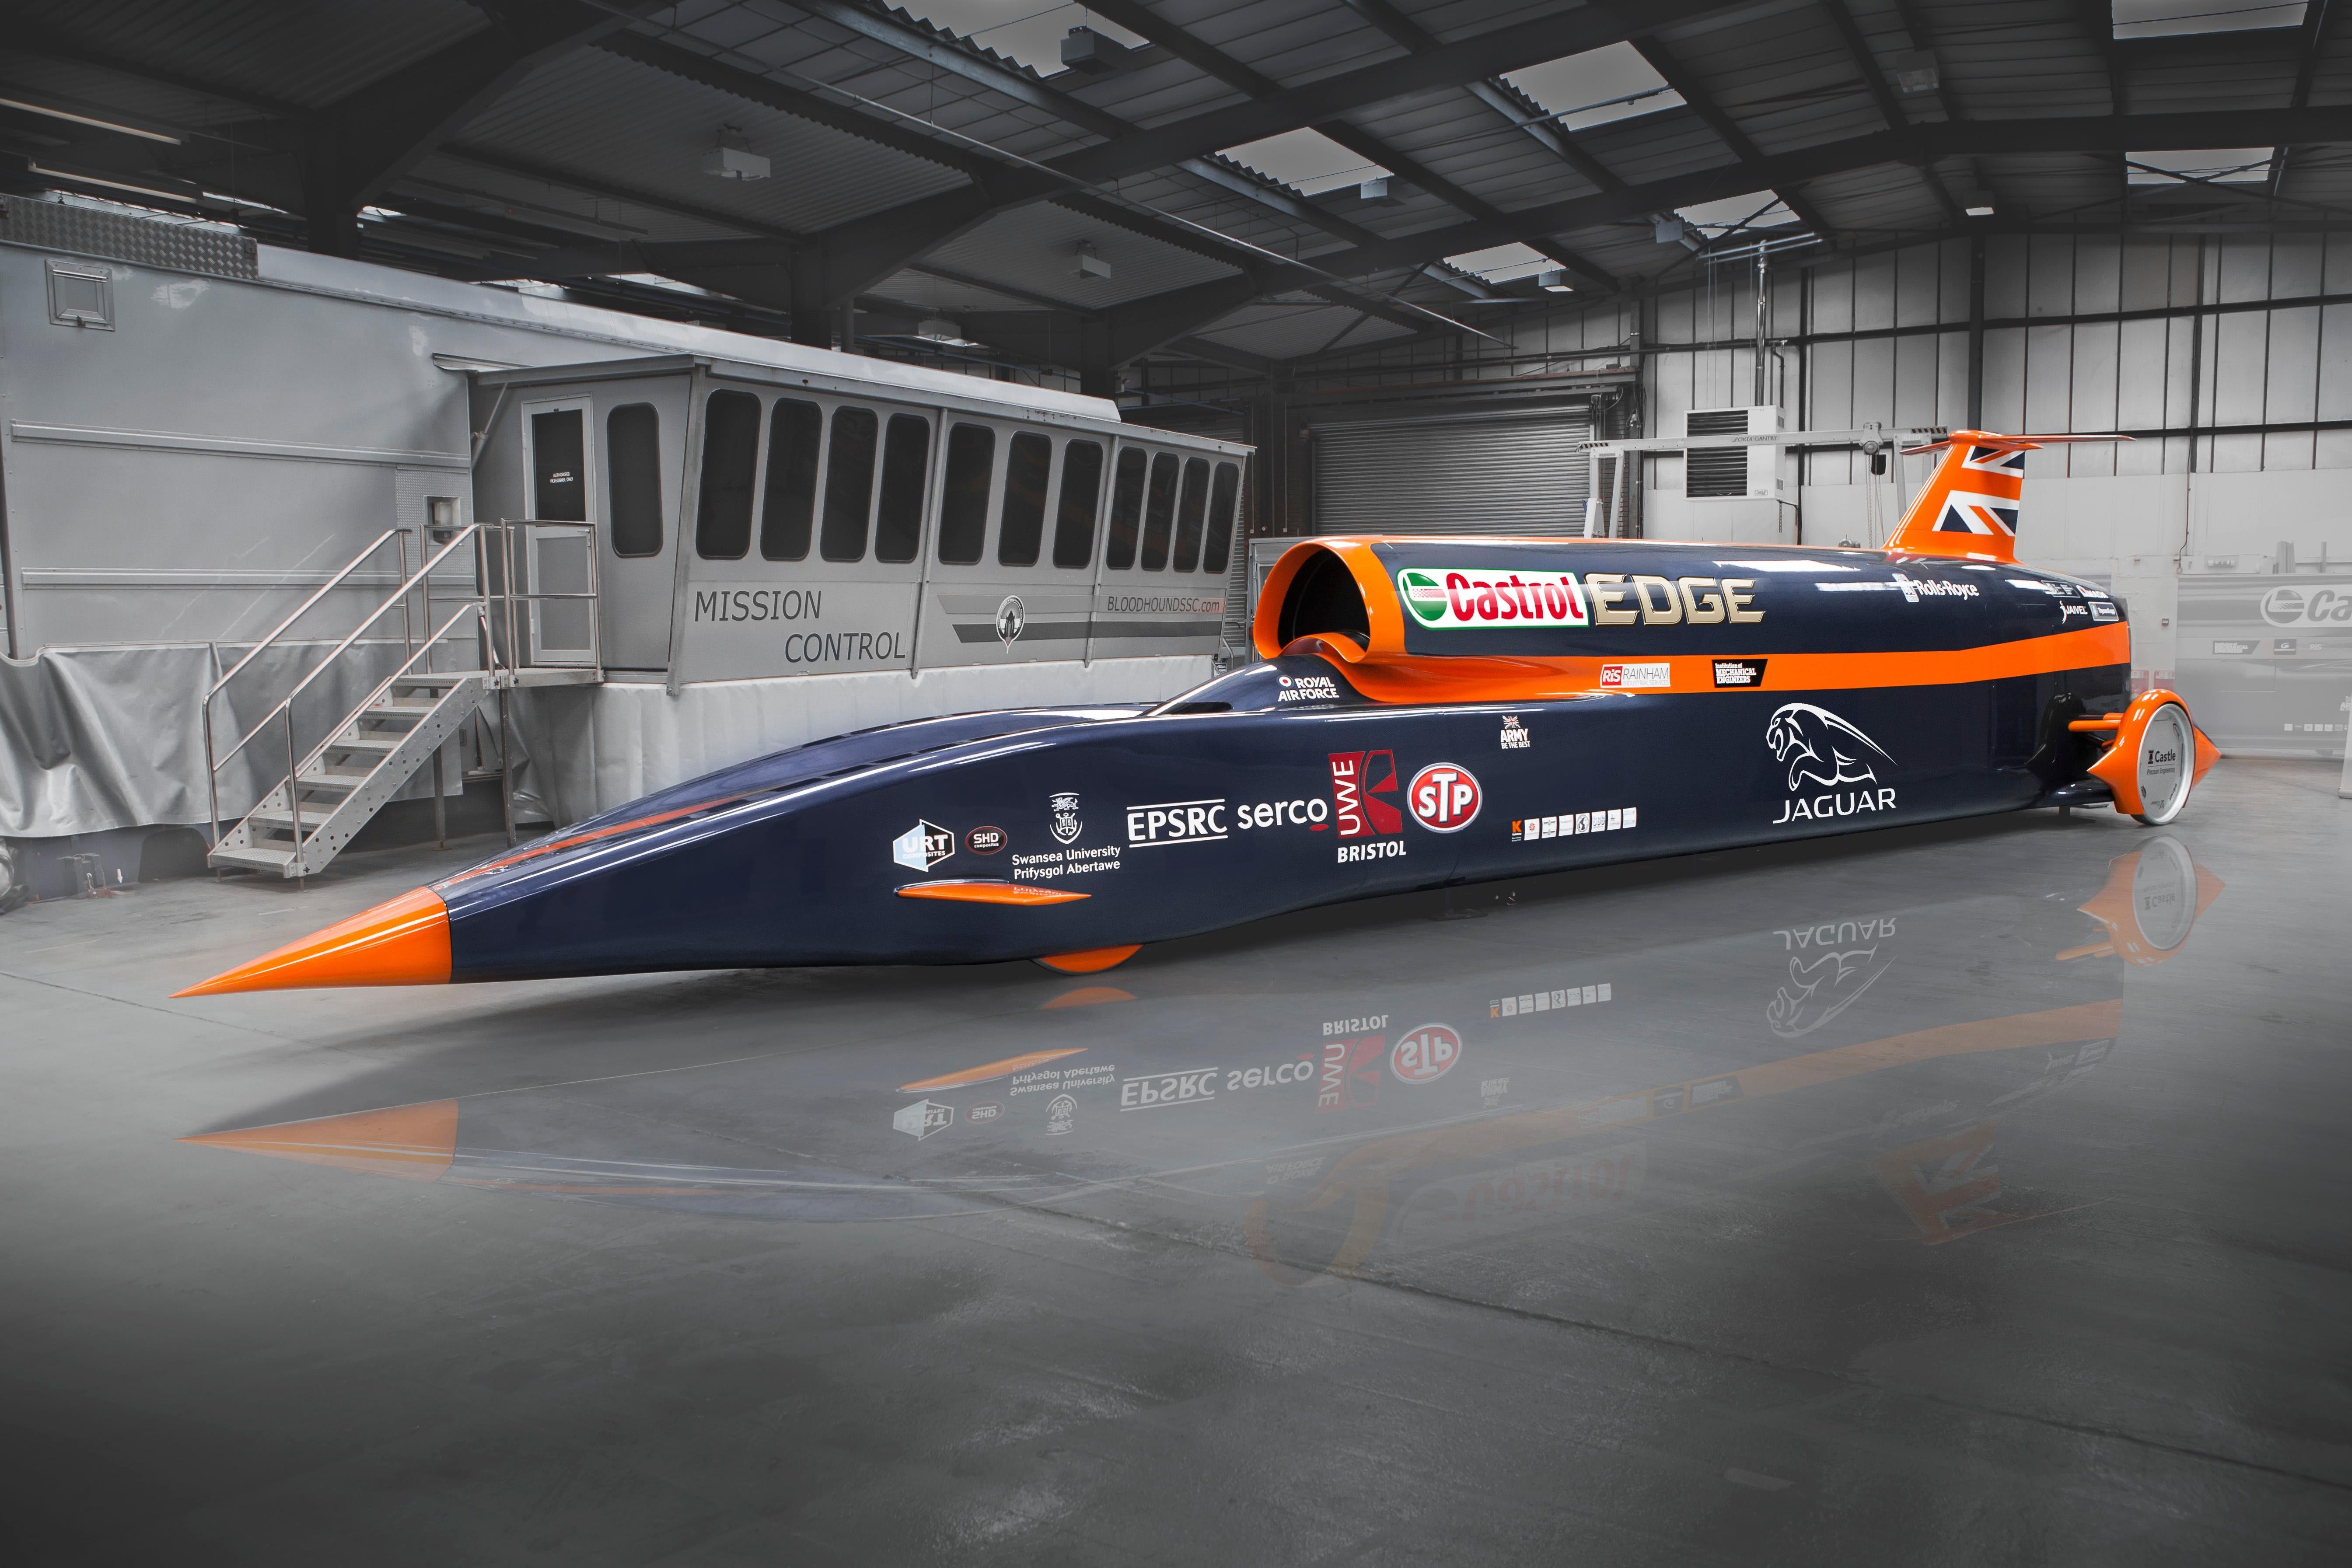 Bloodhound SSC 1000mph land speed record car profile